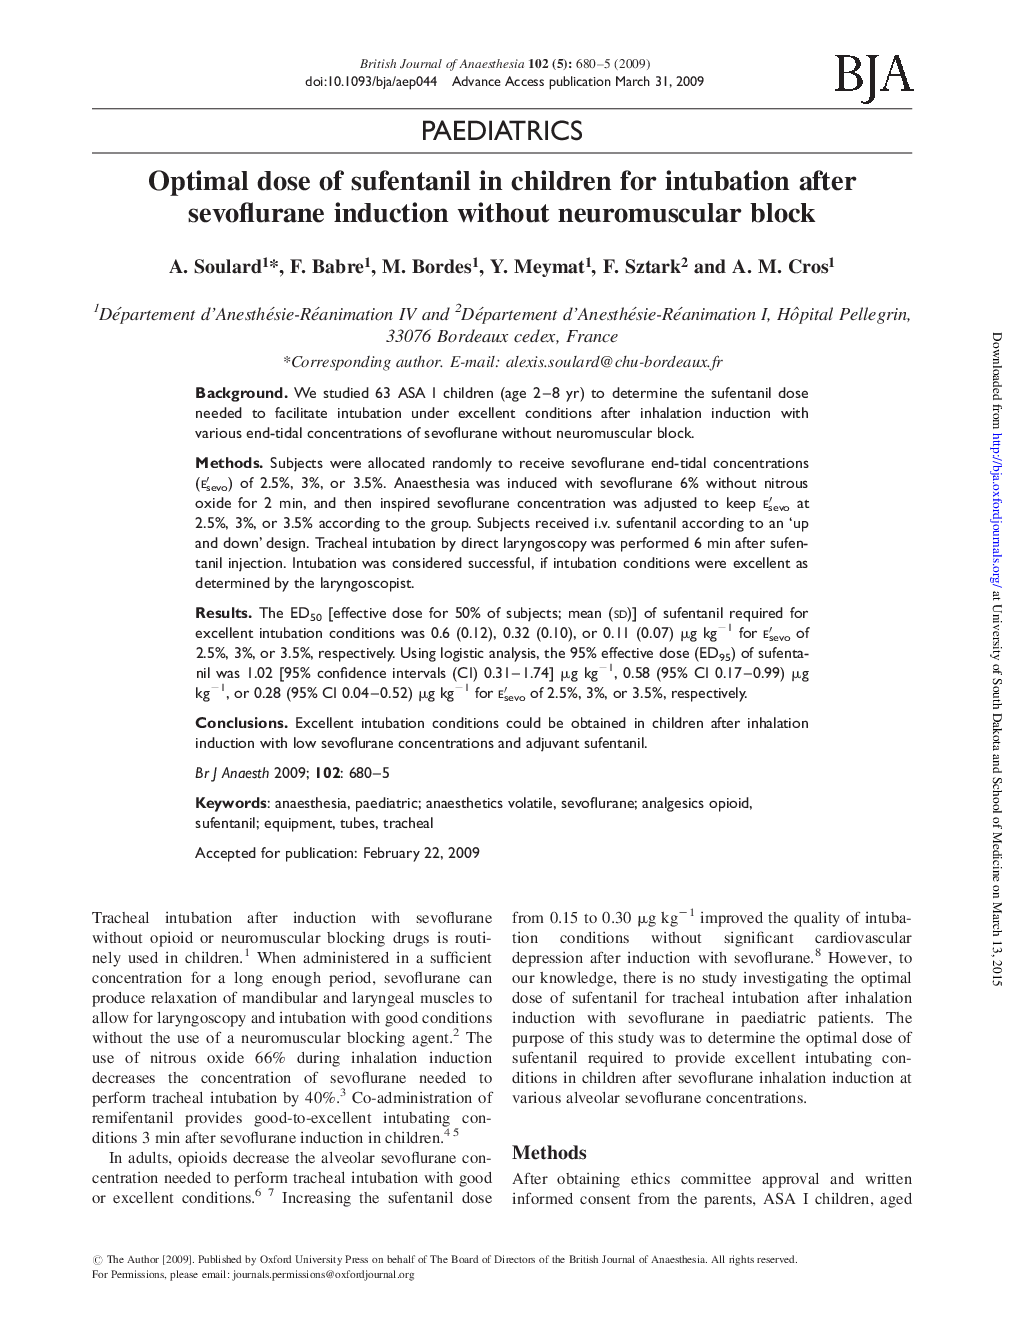 Optimal dose of sufentanil in children for intubation after sevoflurane induction without neuromuscular block